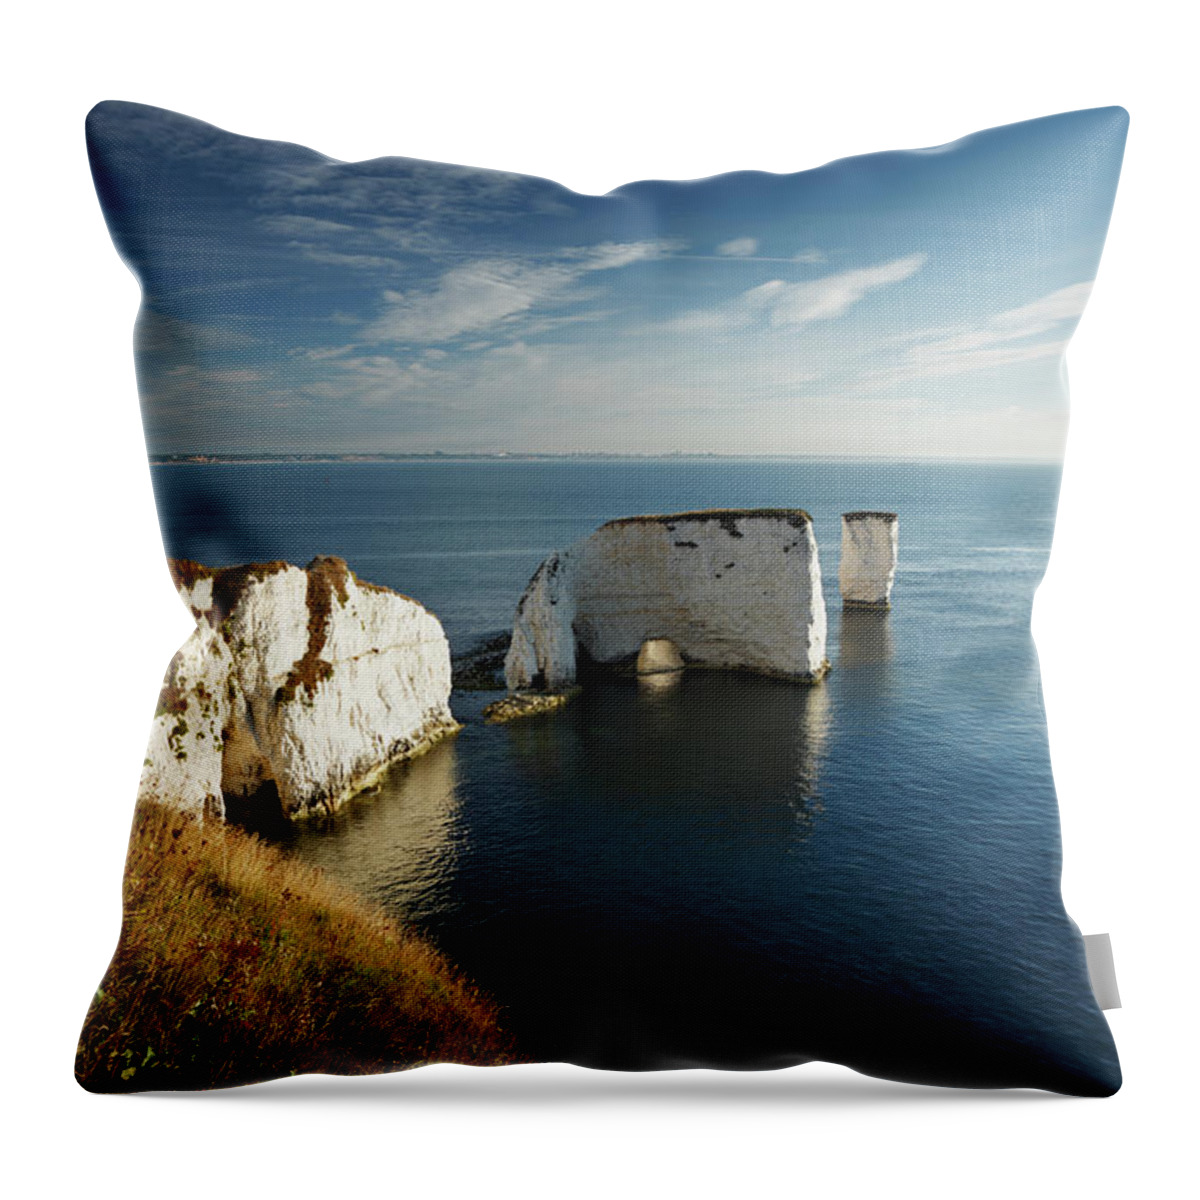 Scenics Throw Pillow featuring the photograph Chalk Cliffs And Sea Stacks #1 by James Osmond